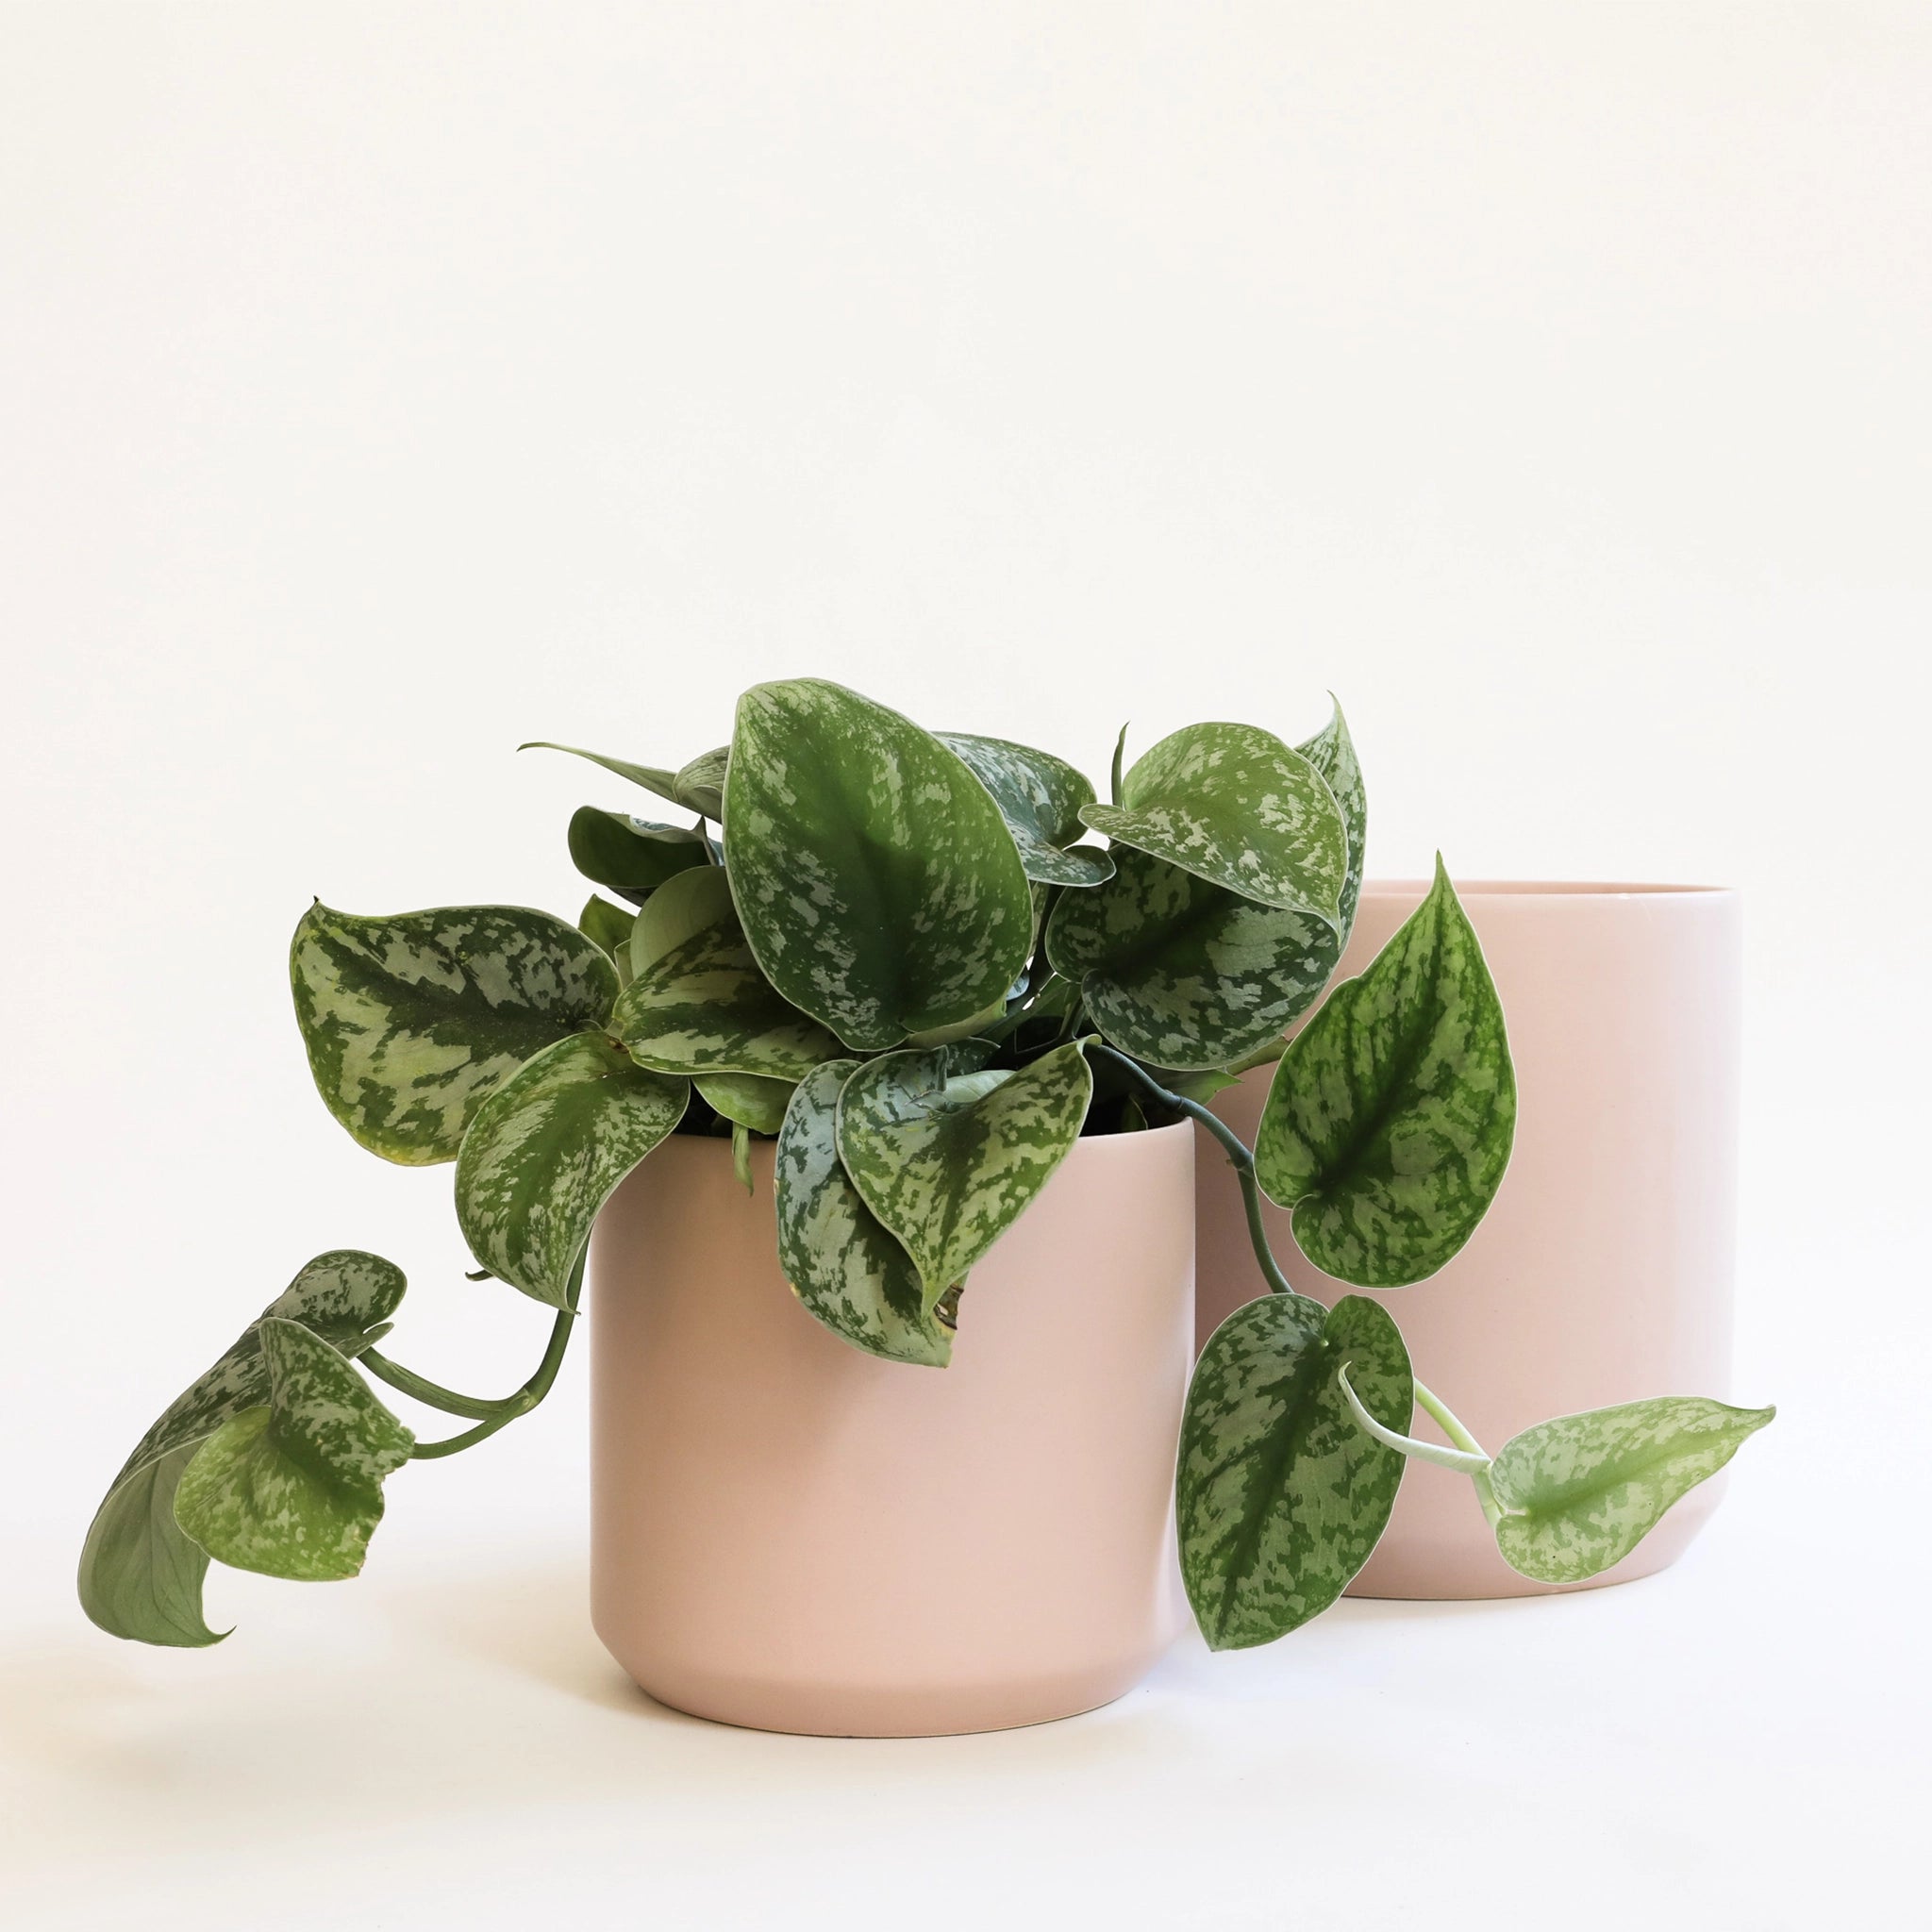 On a cream background is two different sized light pink ceramic planter with a plant inside that is not included.